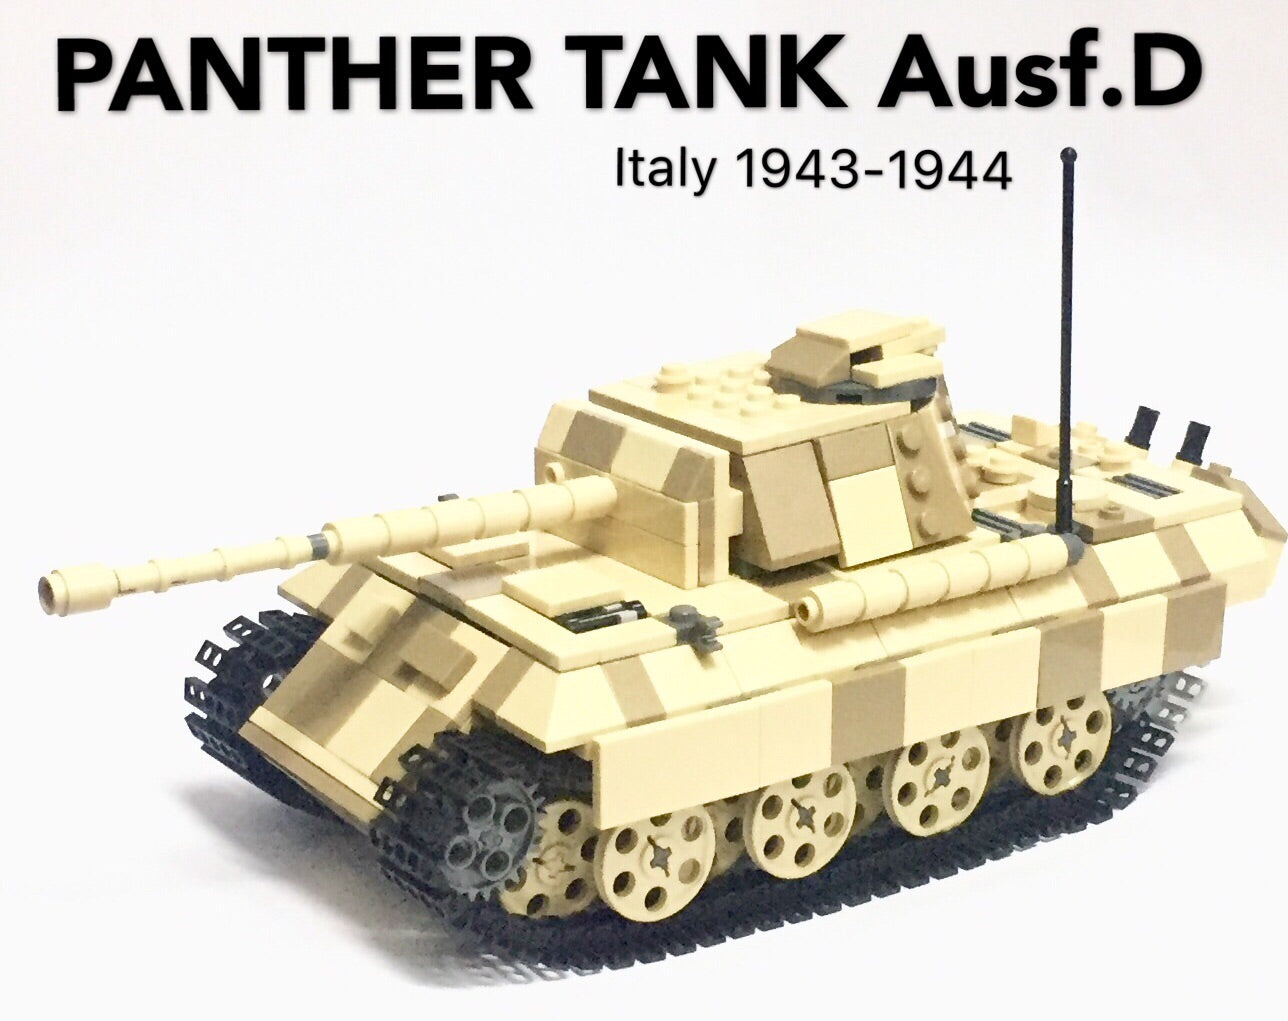 PANTHER TANK Ausf.D Italy 1943-1944